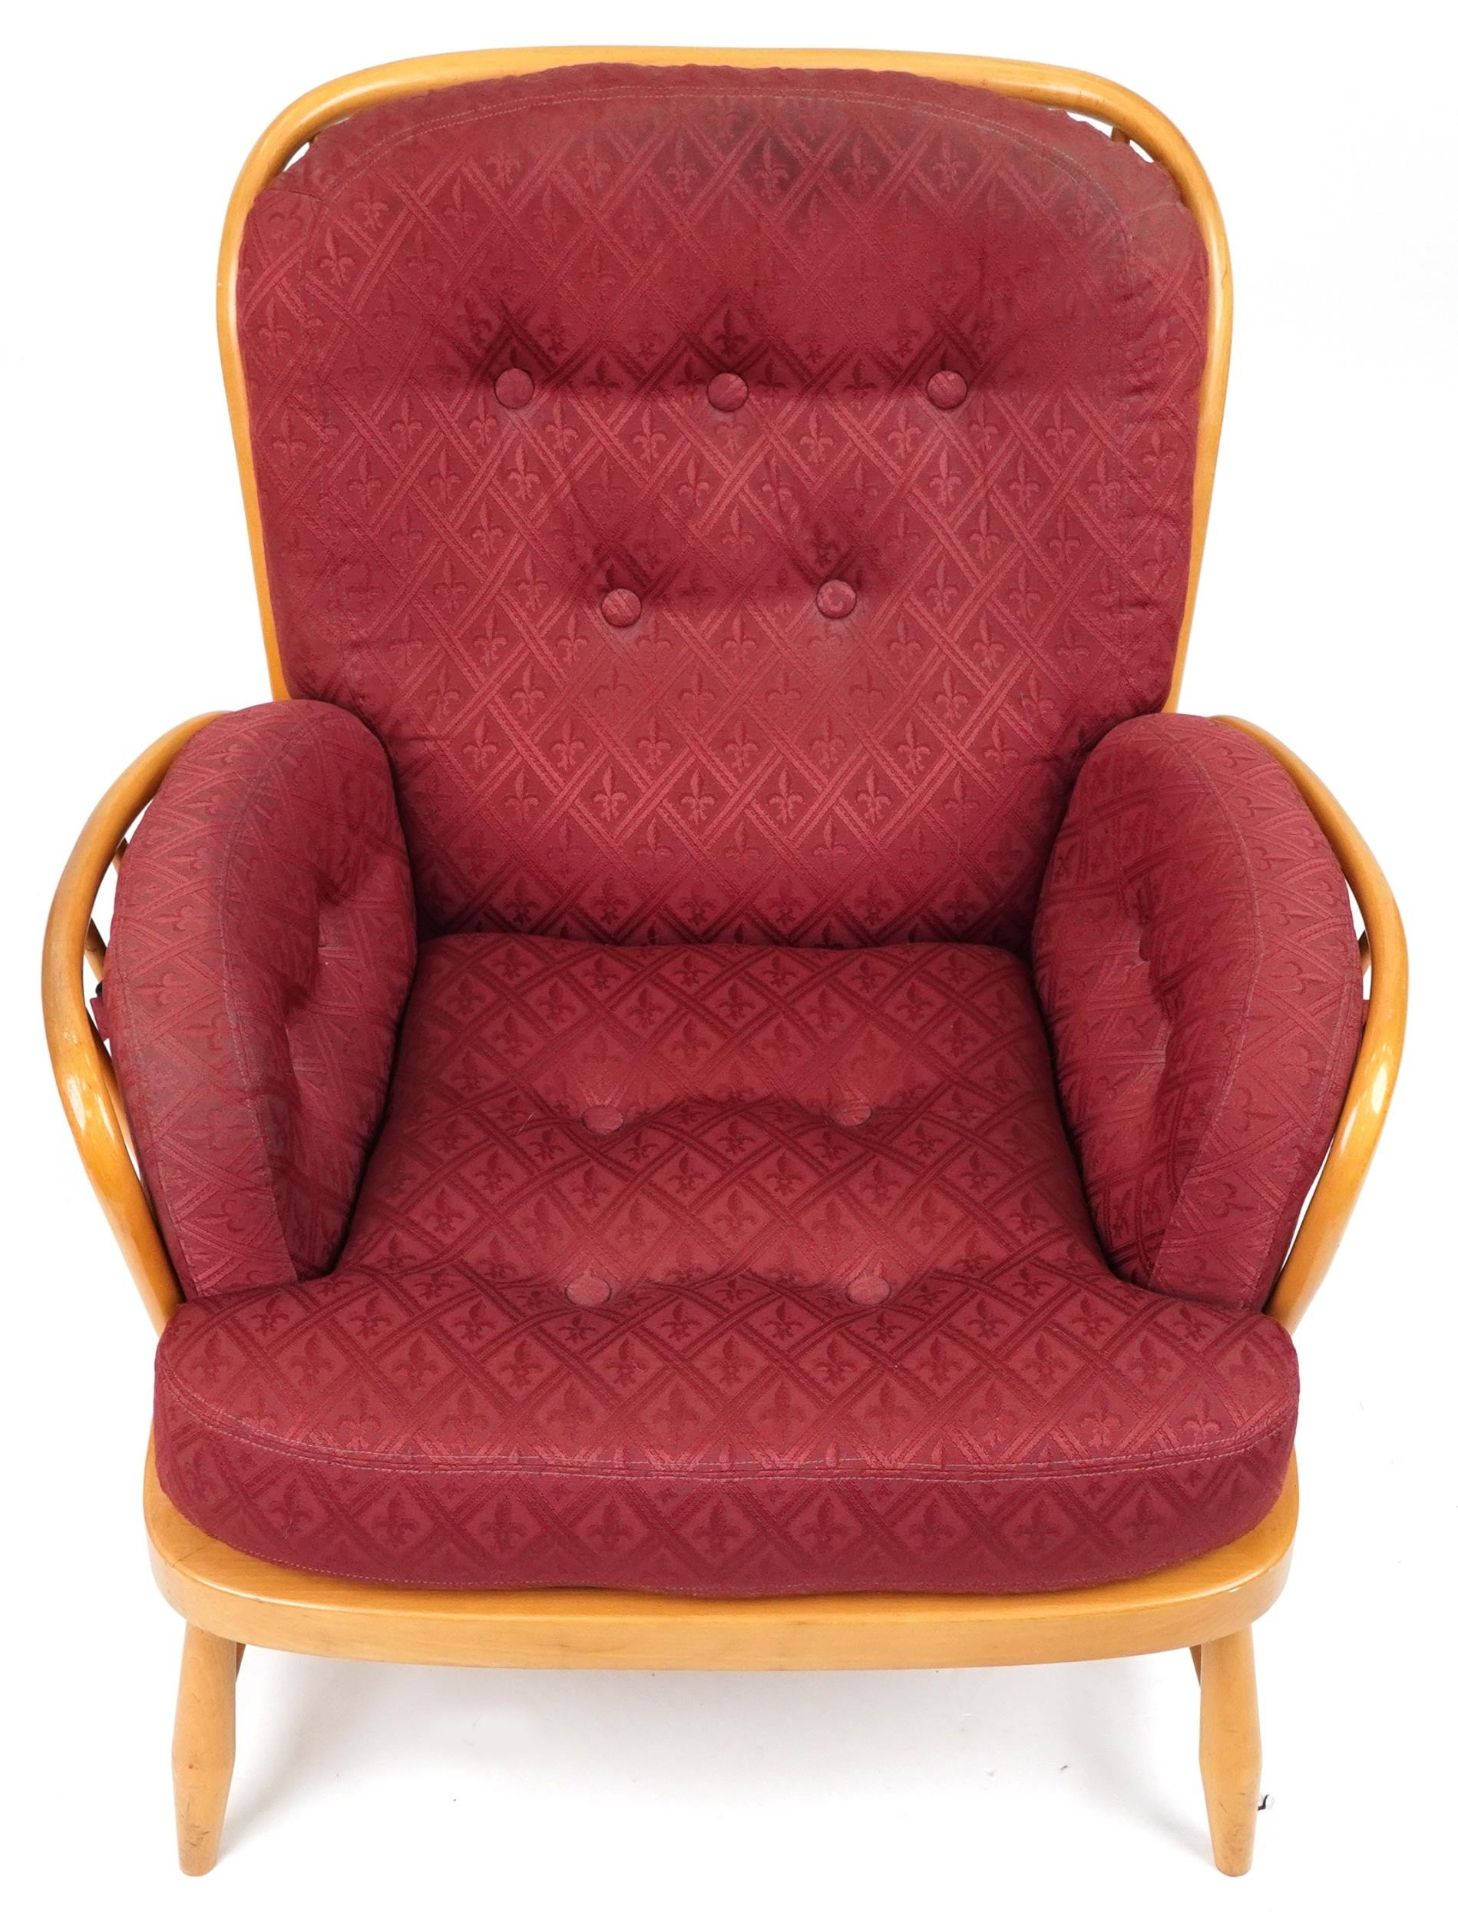 Ercol light elm Jubilee stick back armchair with red fleur de lis upholstered cushioned seats, - Image 6 of 6